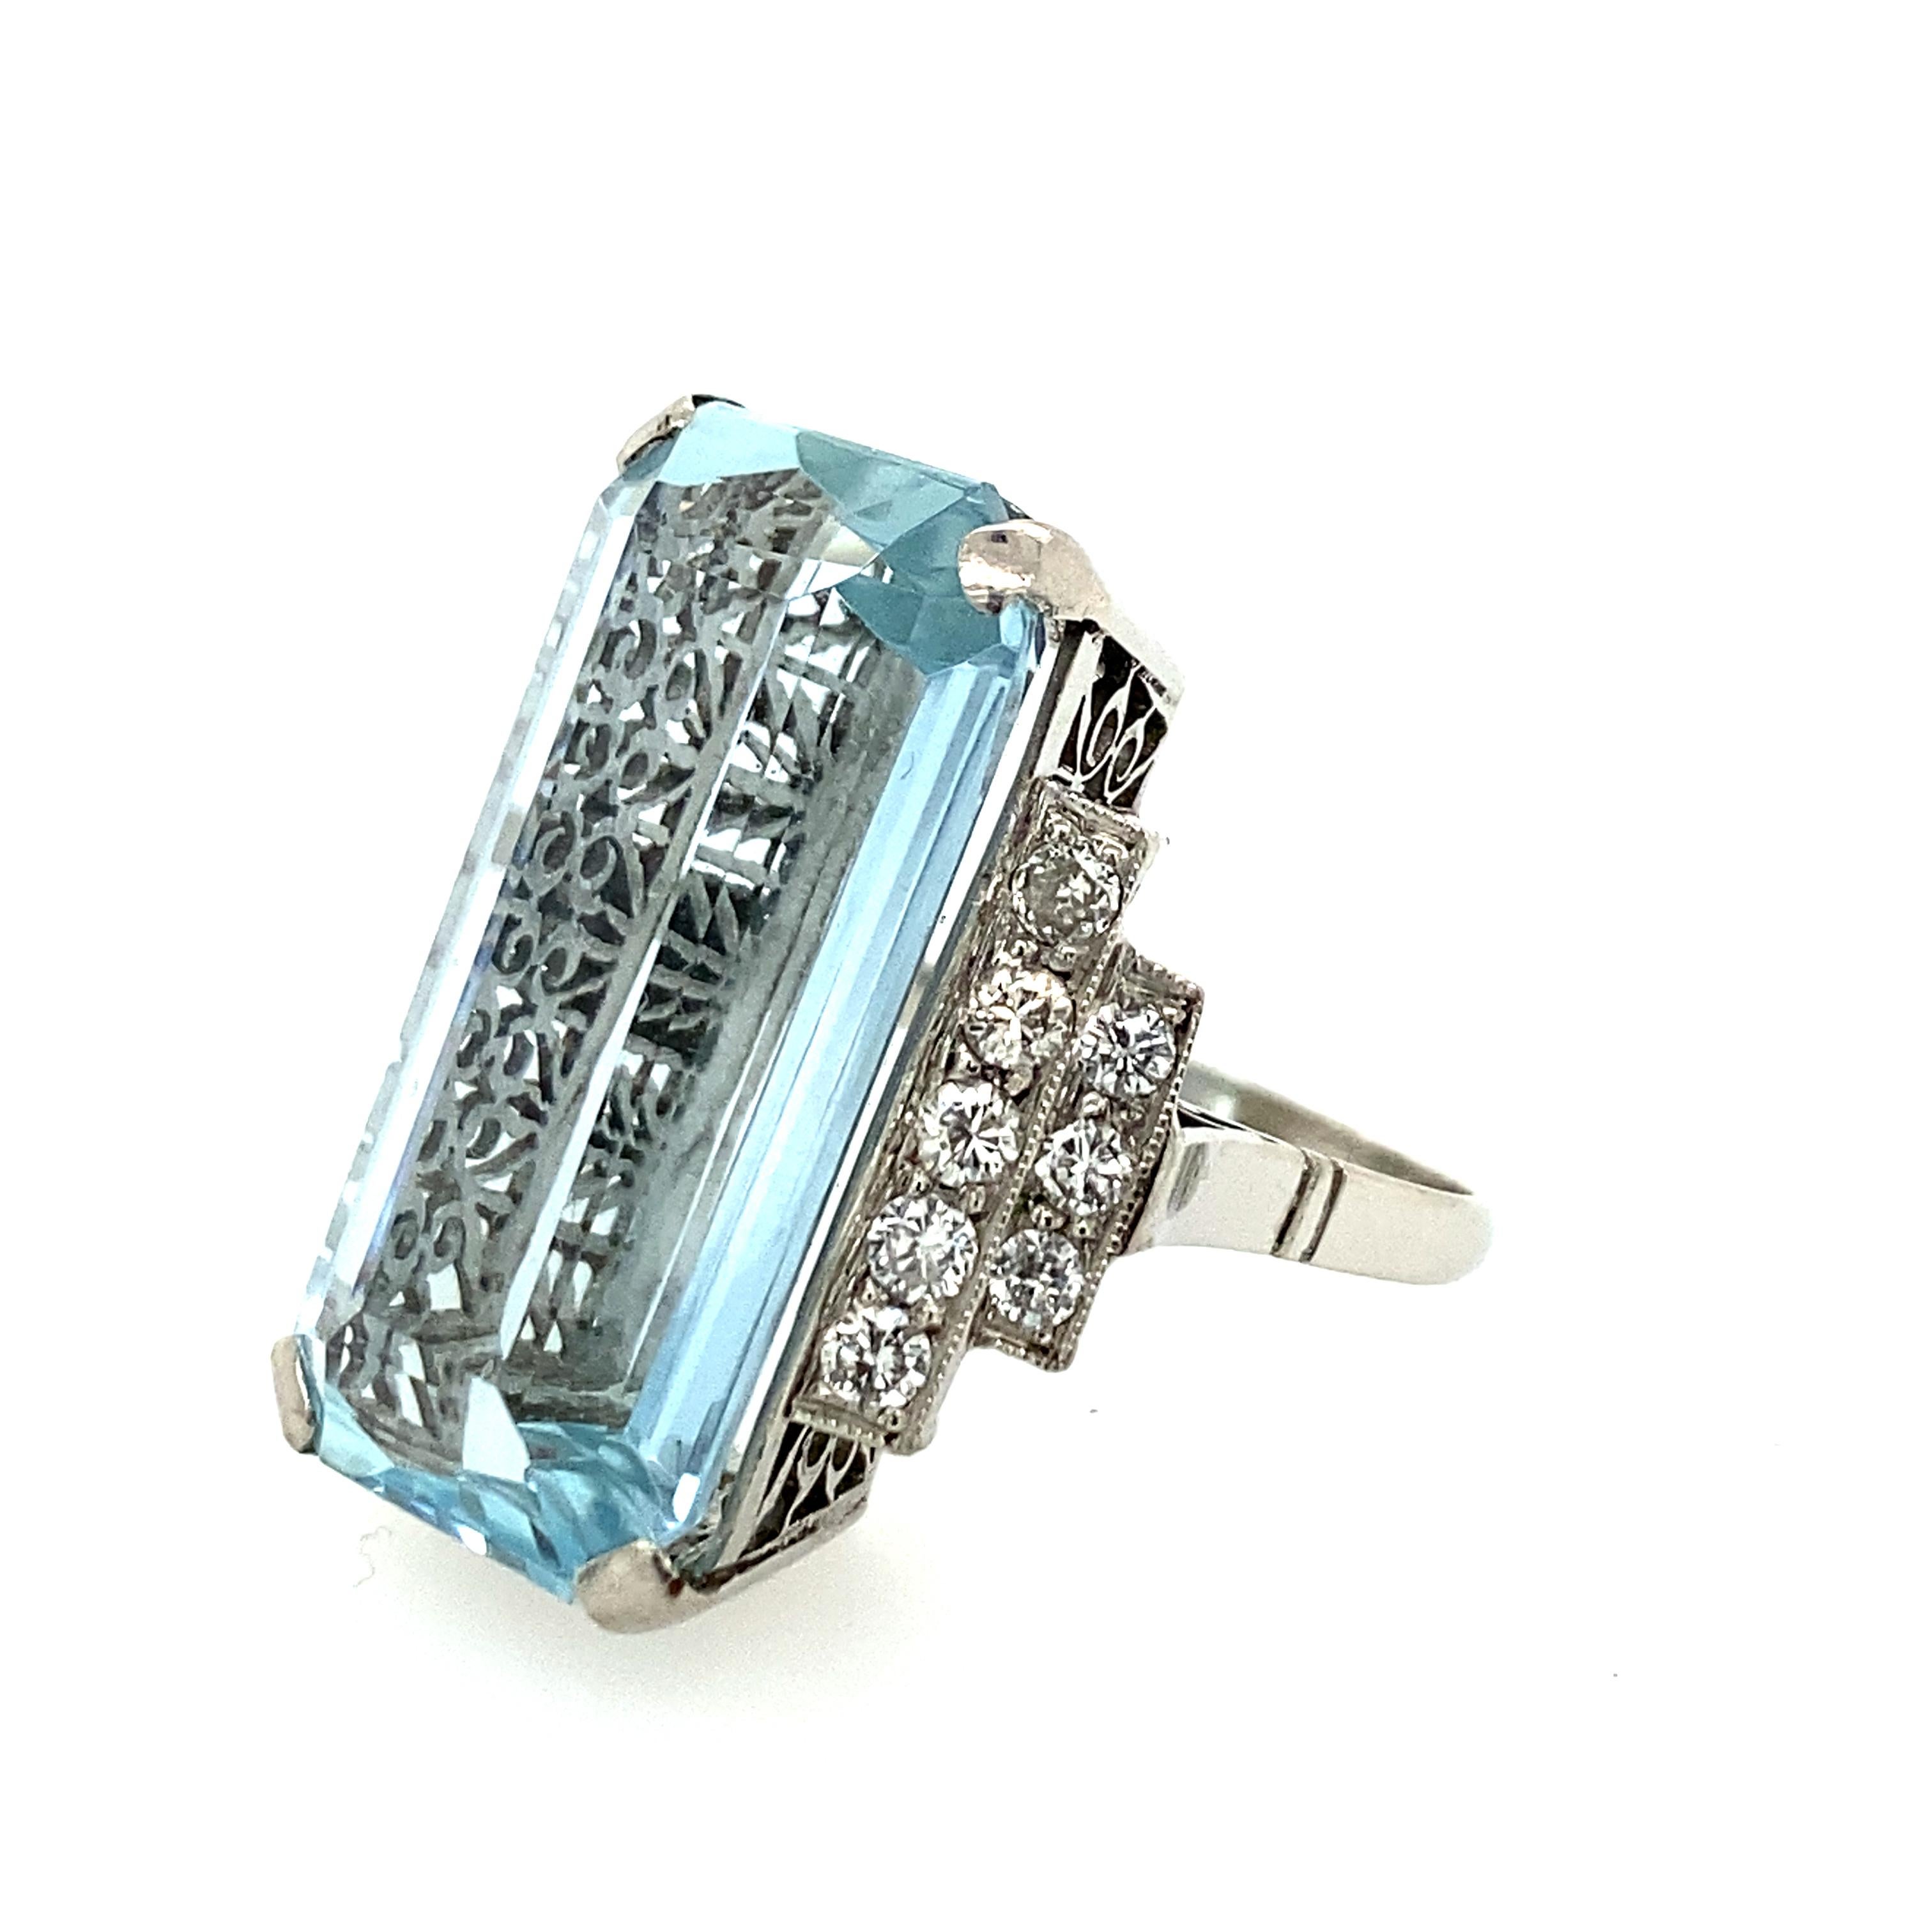 Art Deco Style aquamarine and diamond ring with .85cts of brilliant diamonds surrounding the center stone. The aquamarine measures 25.00x12.18mm and is set in platinum.